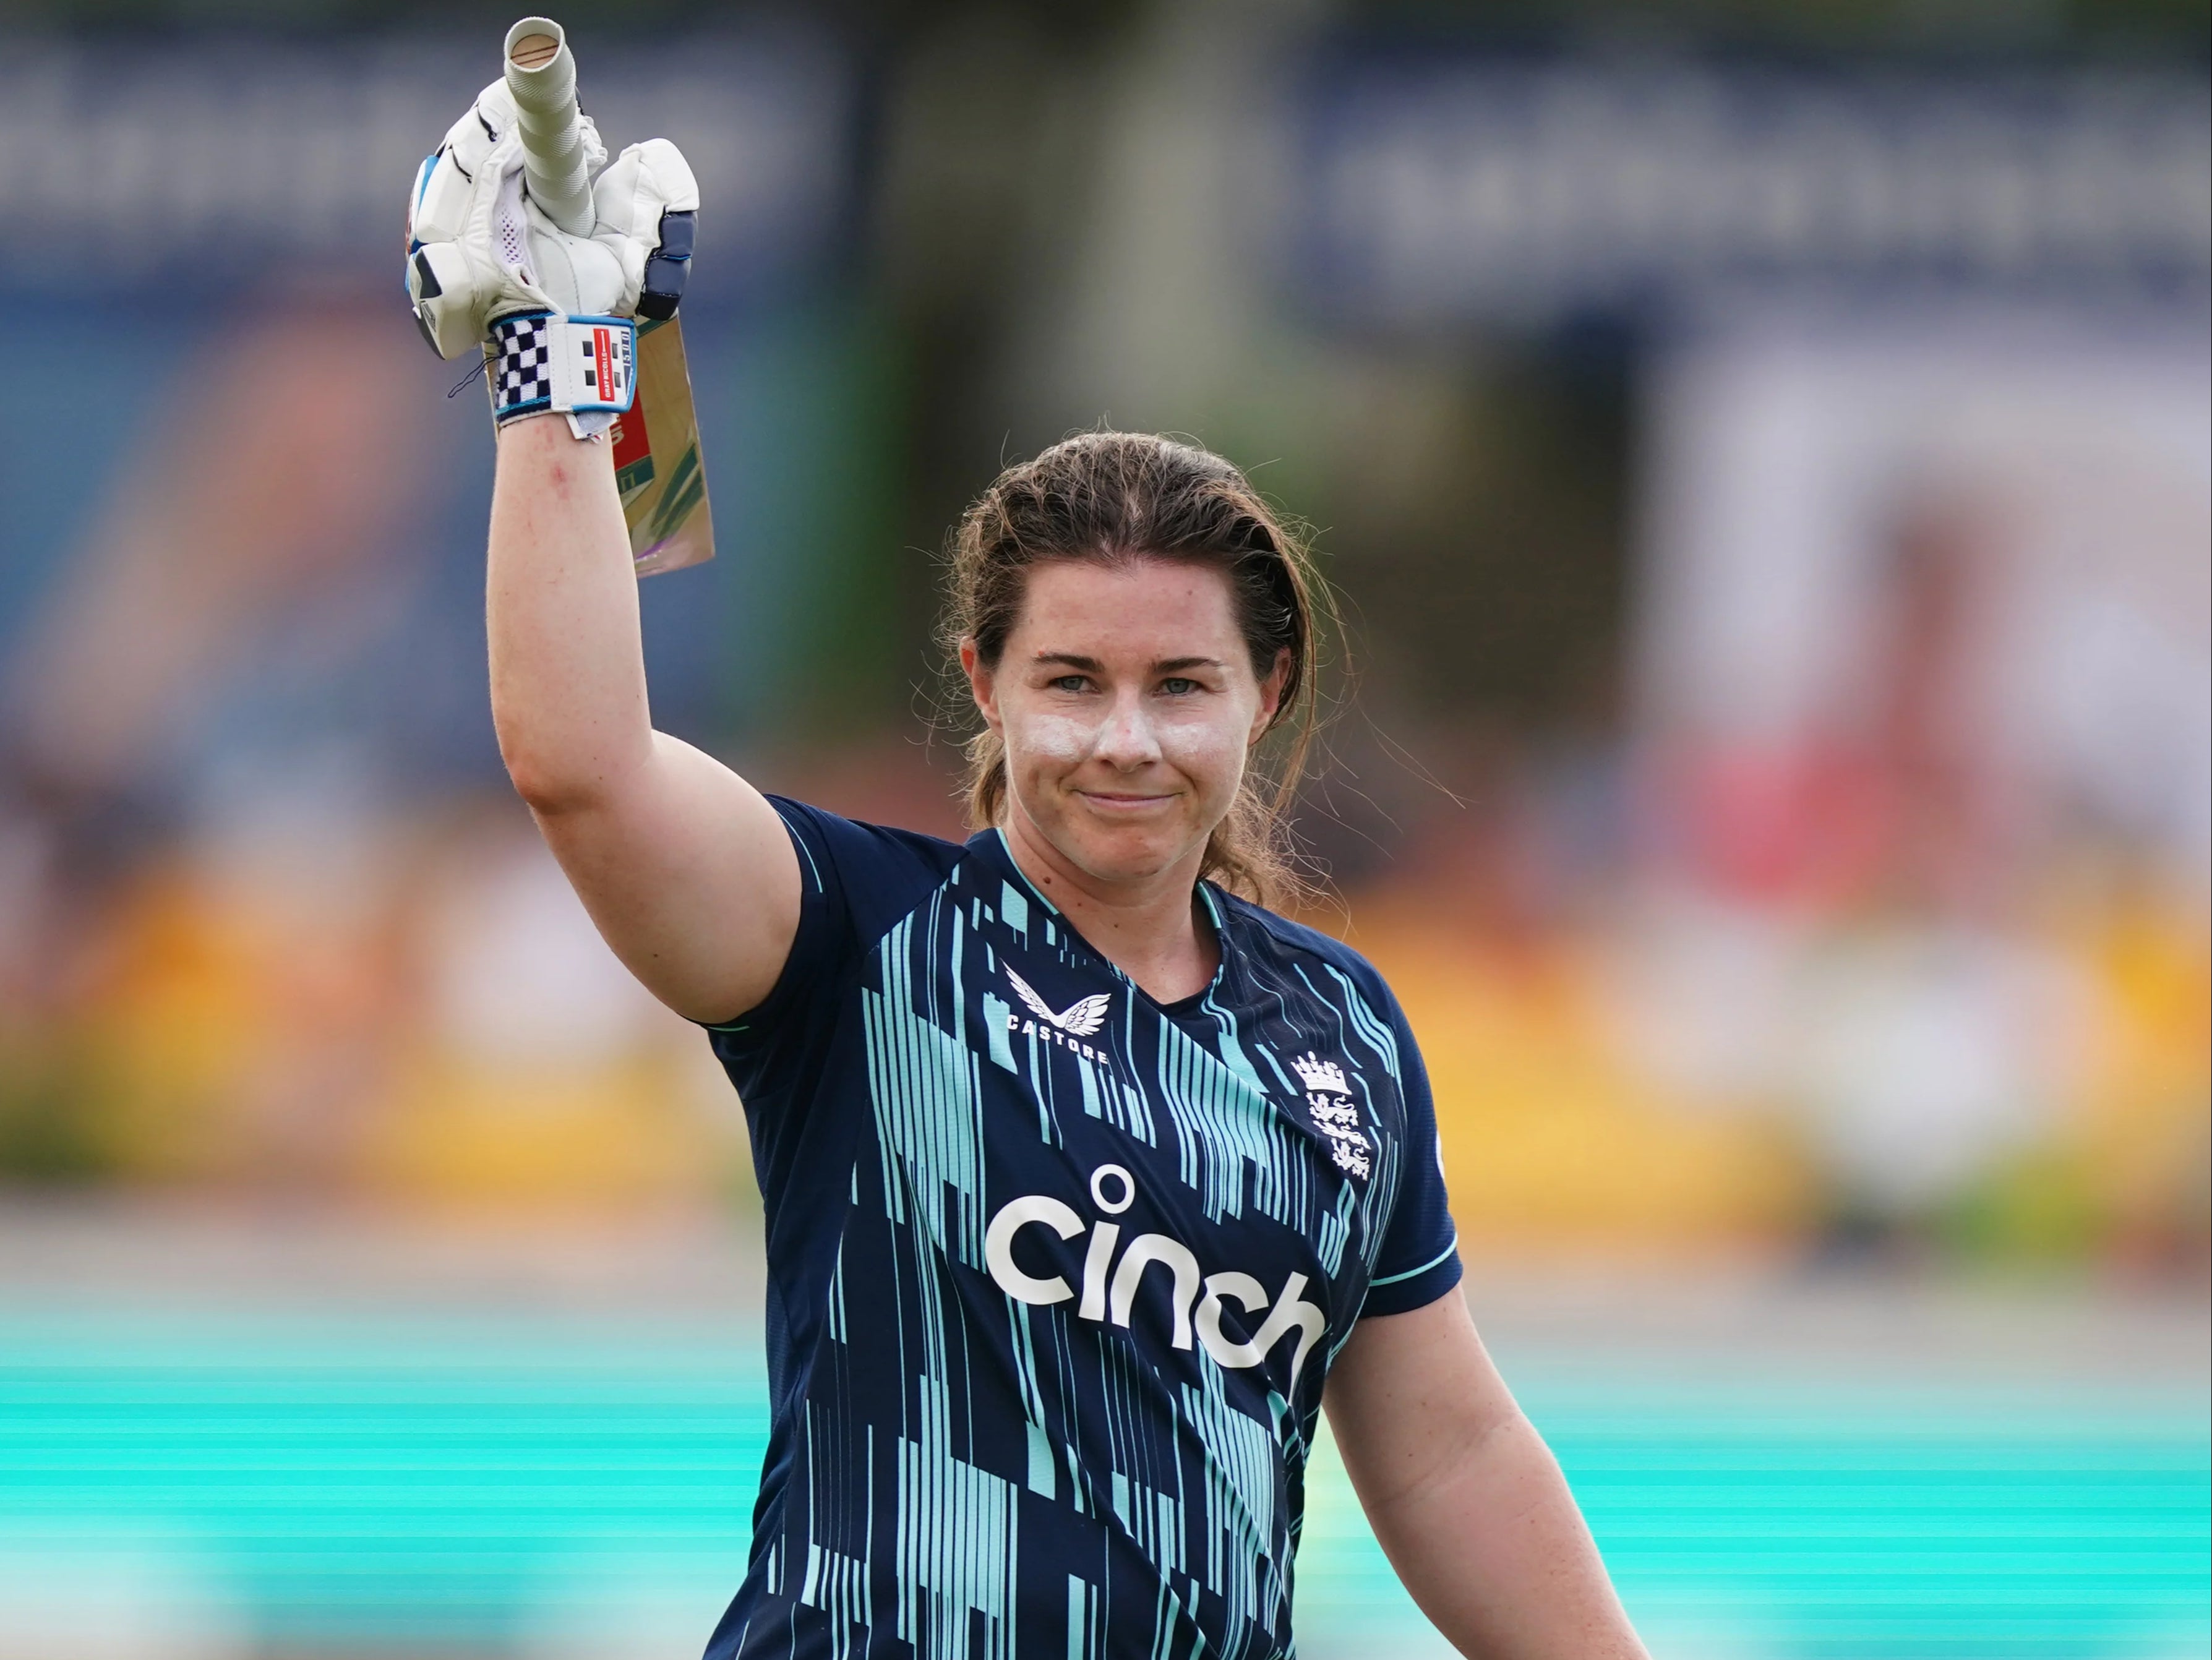 Tammy Beaumont is one of only two members of Saturday’s squad to have played at Lord’s for England before